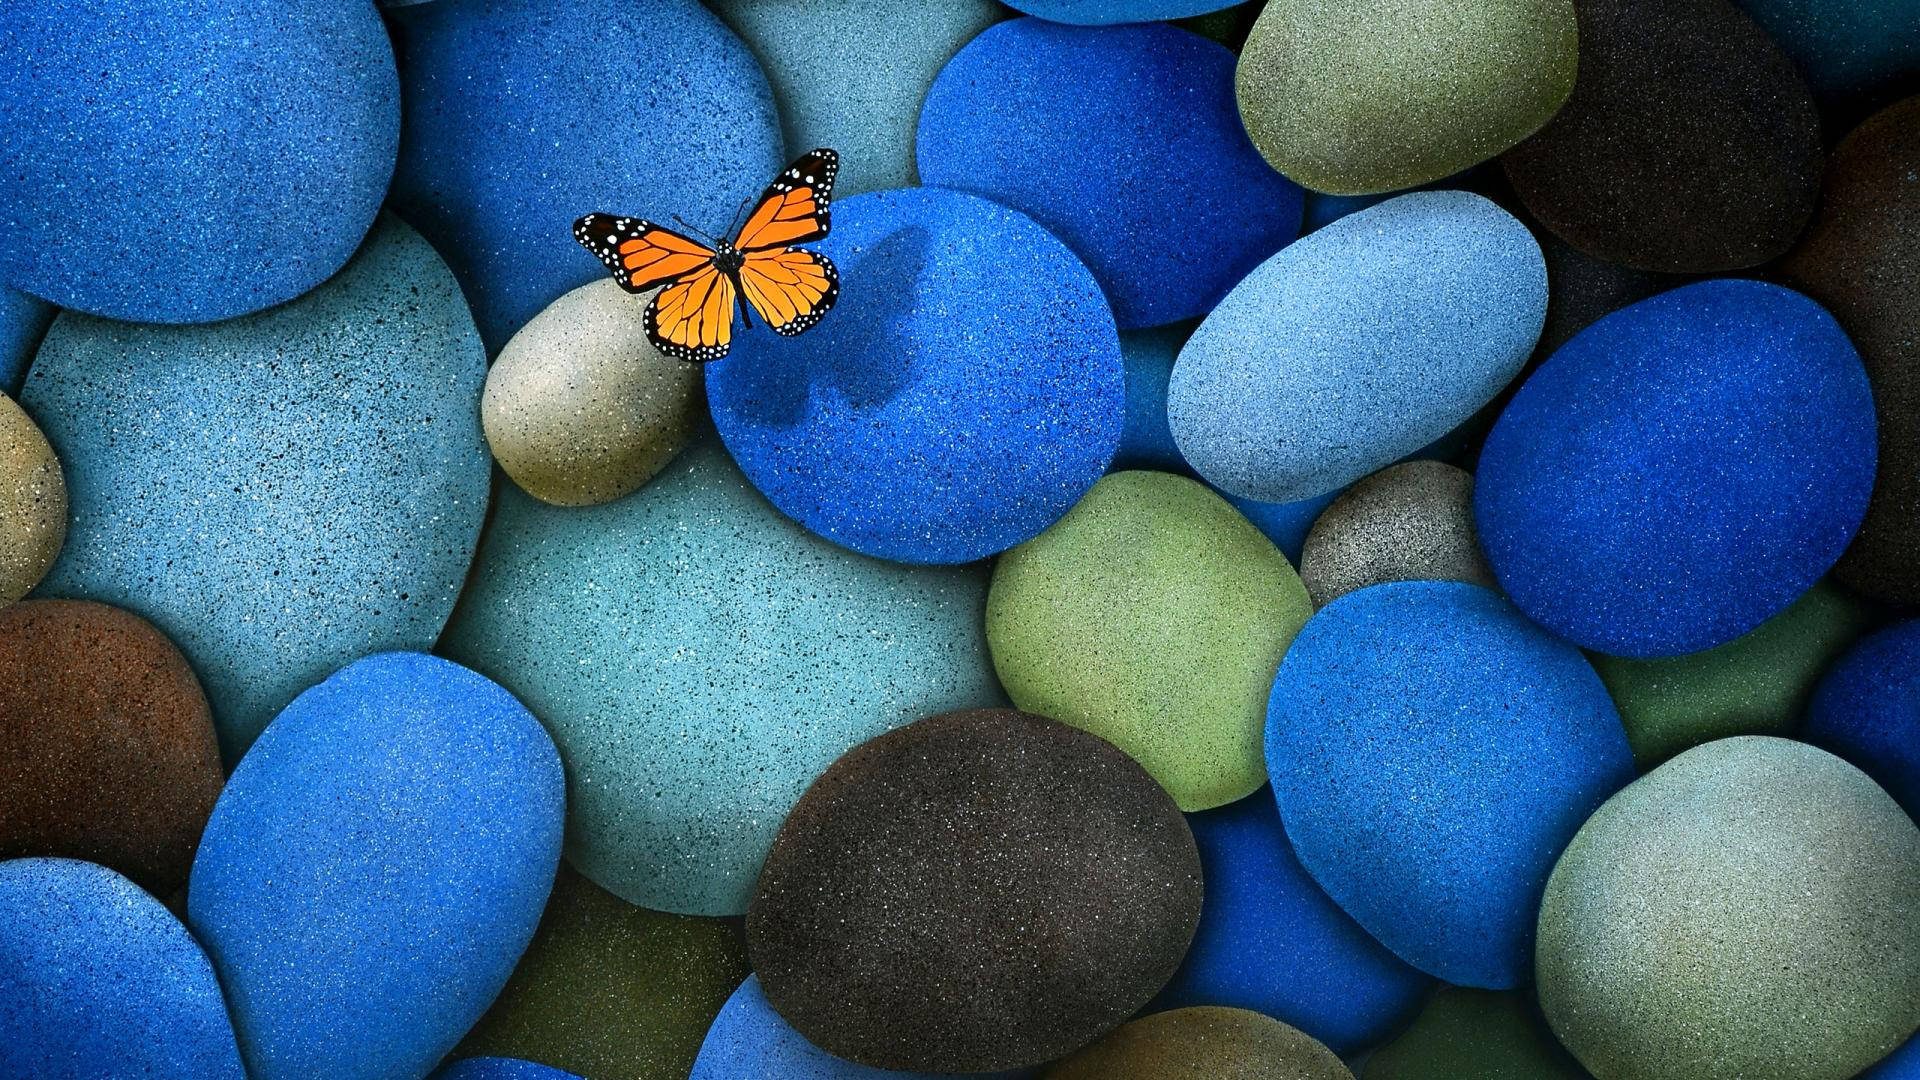 Beautiful Hd Butterfly And Colorful Stones Background